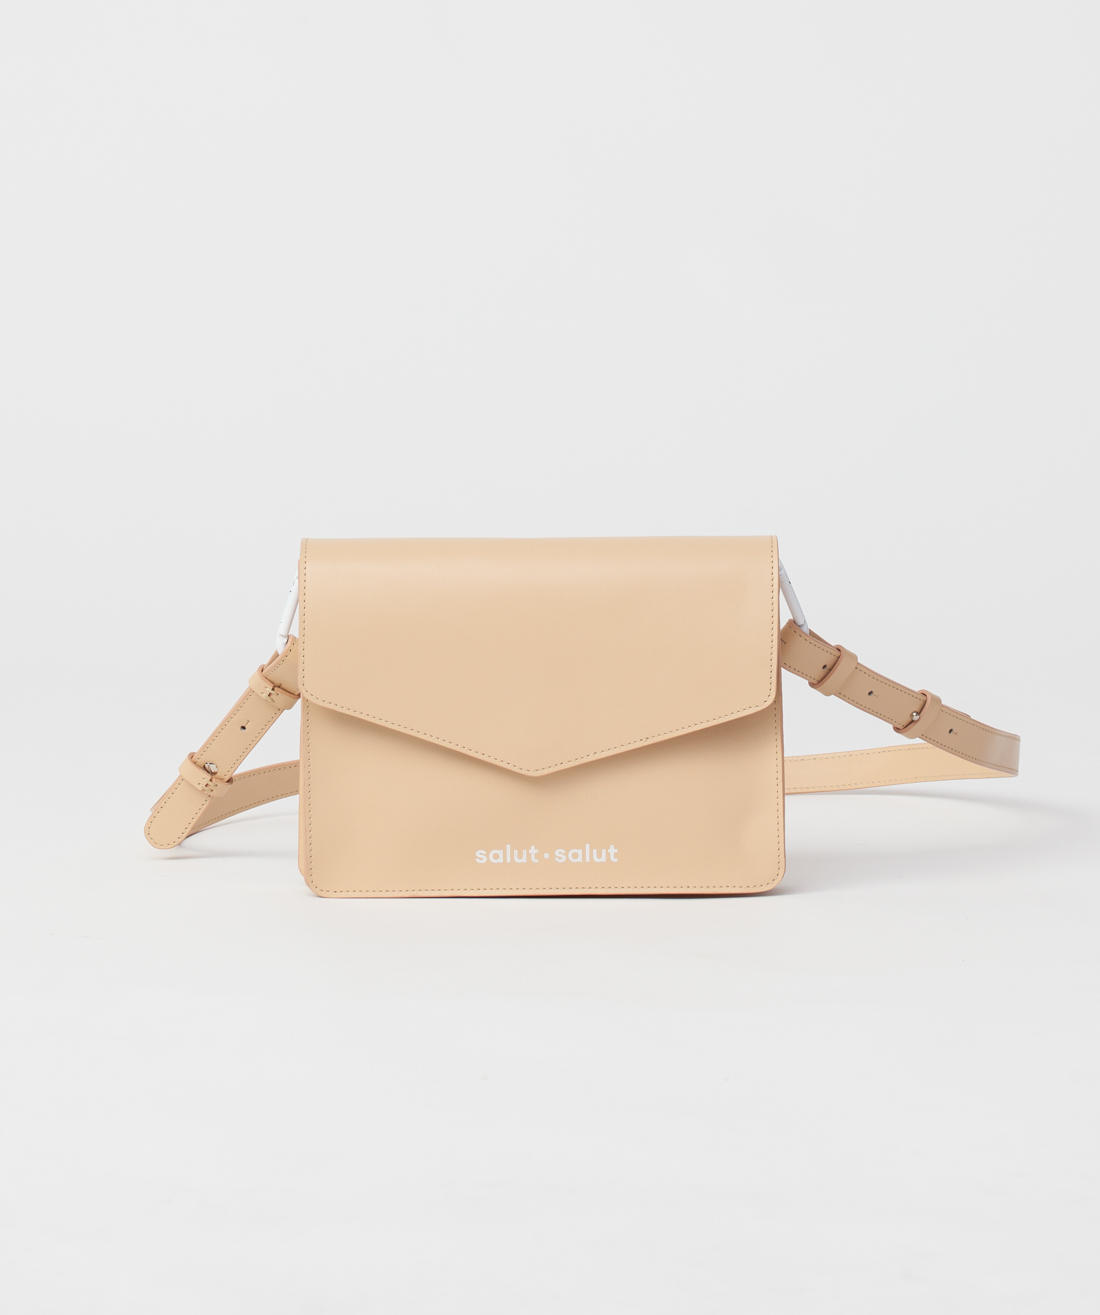 PROMO - Mail Box - CUIR NUDE